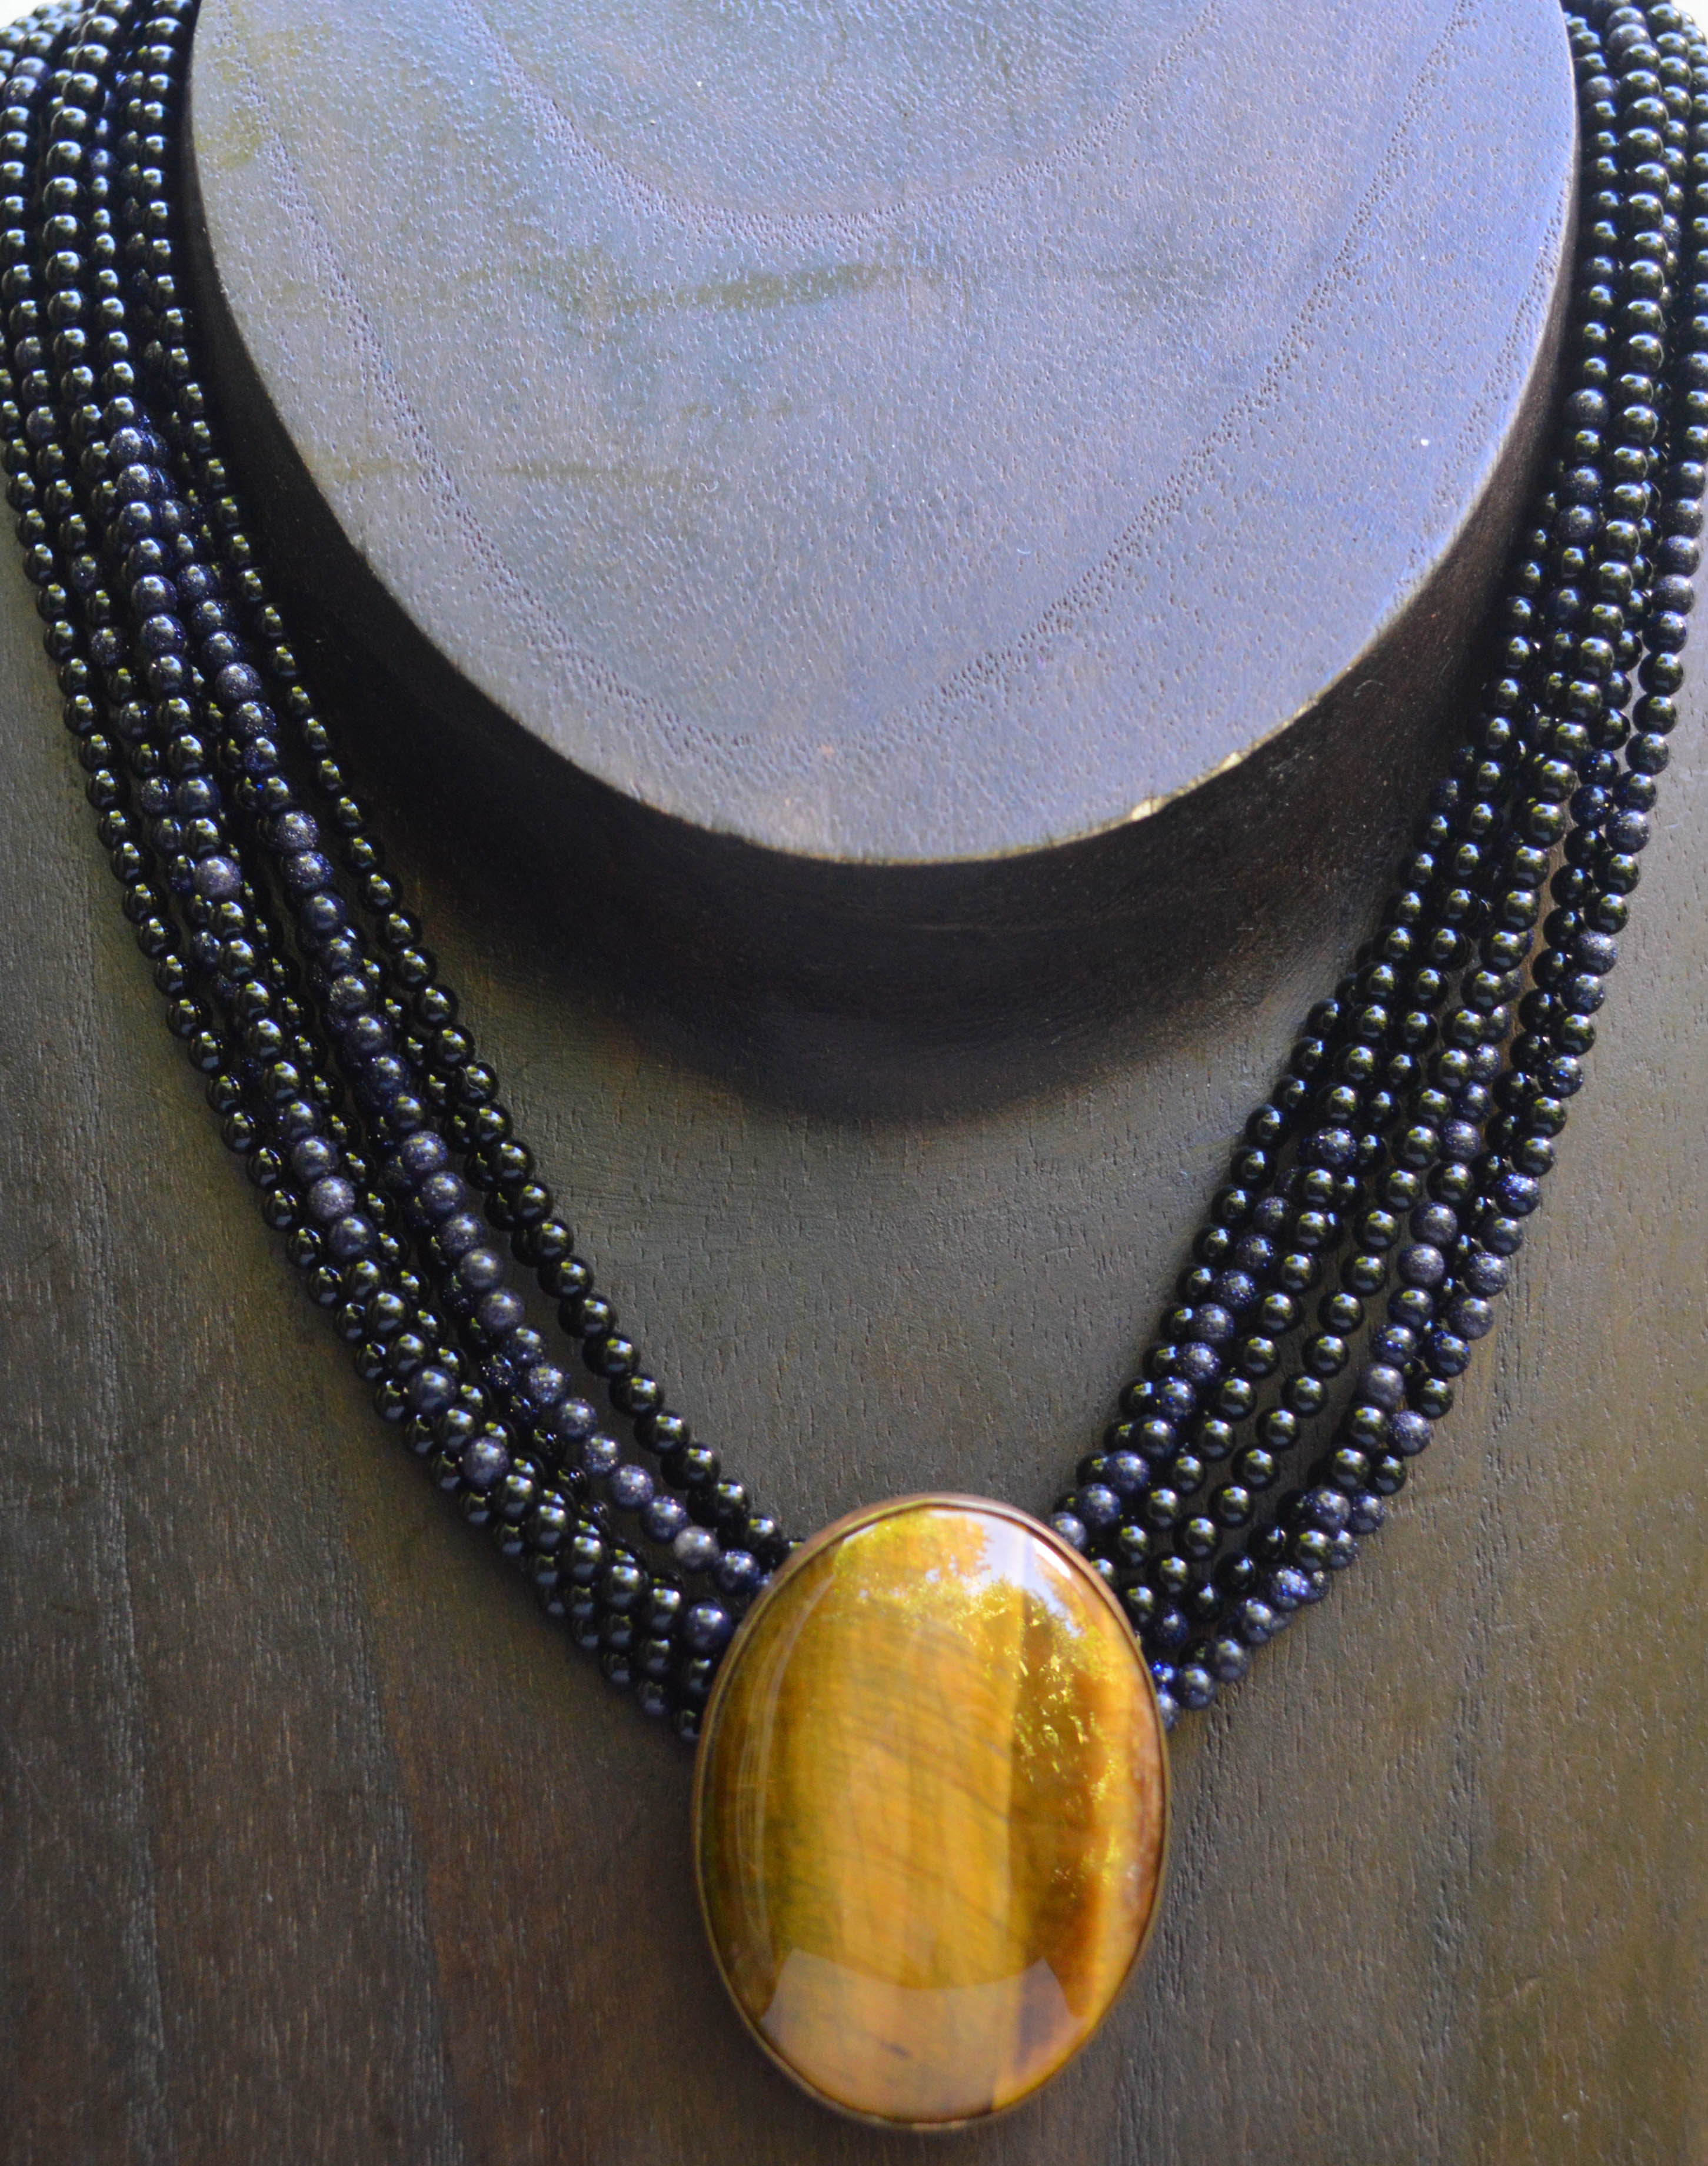 Blue GoldStone Multistrand Necklace with Tigers Eye Cabouchon